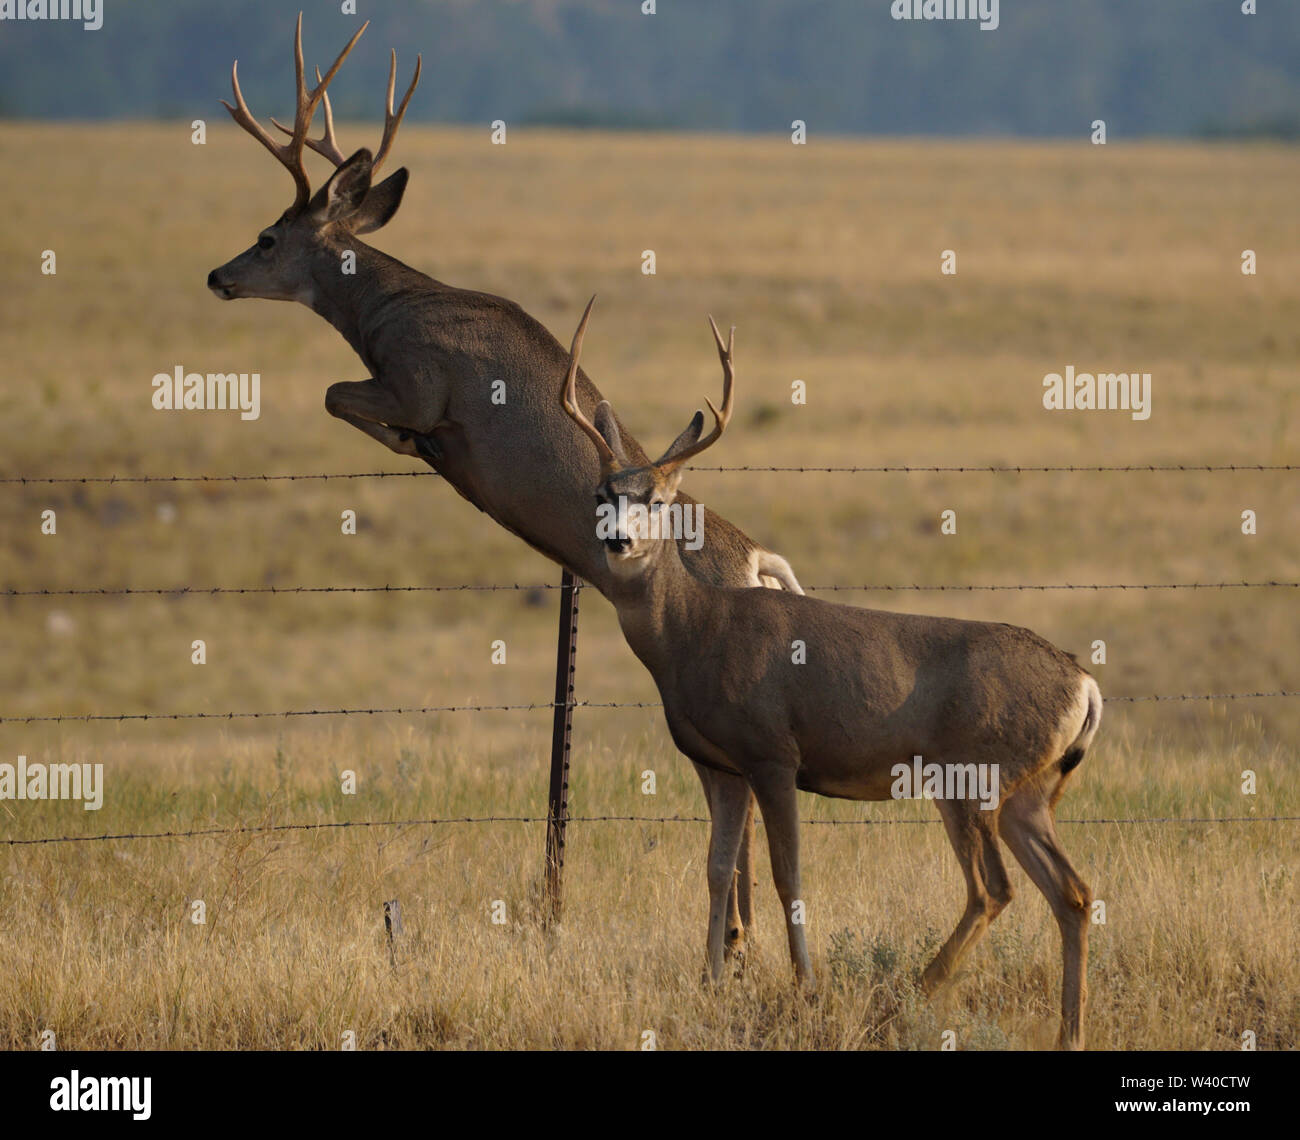 Two young bucks jumping a barbed wire fence in a rural field. Stock Photo